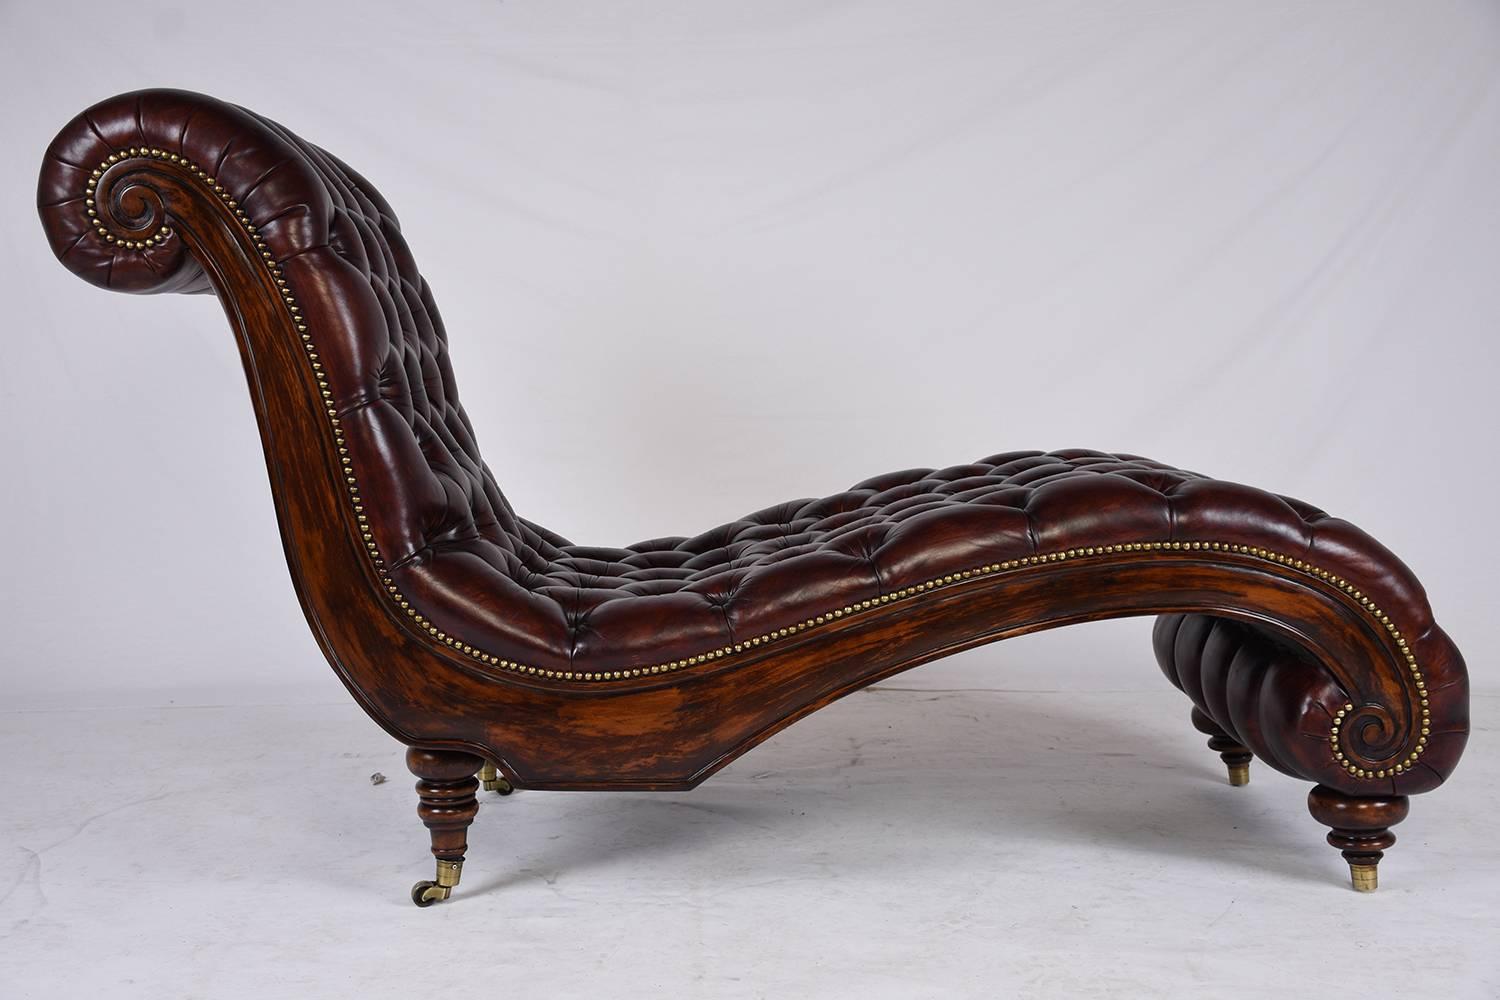 This 1980s vintage Chesterfield chaise lounge features a wood frame that has been stained in a rich mahogany color and a polished finish. Adorning the wood are simple carved moulding and scroll work details. There is a single drawer at the base of